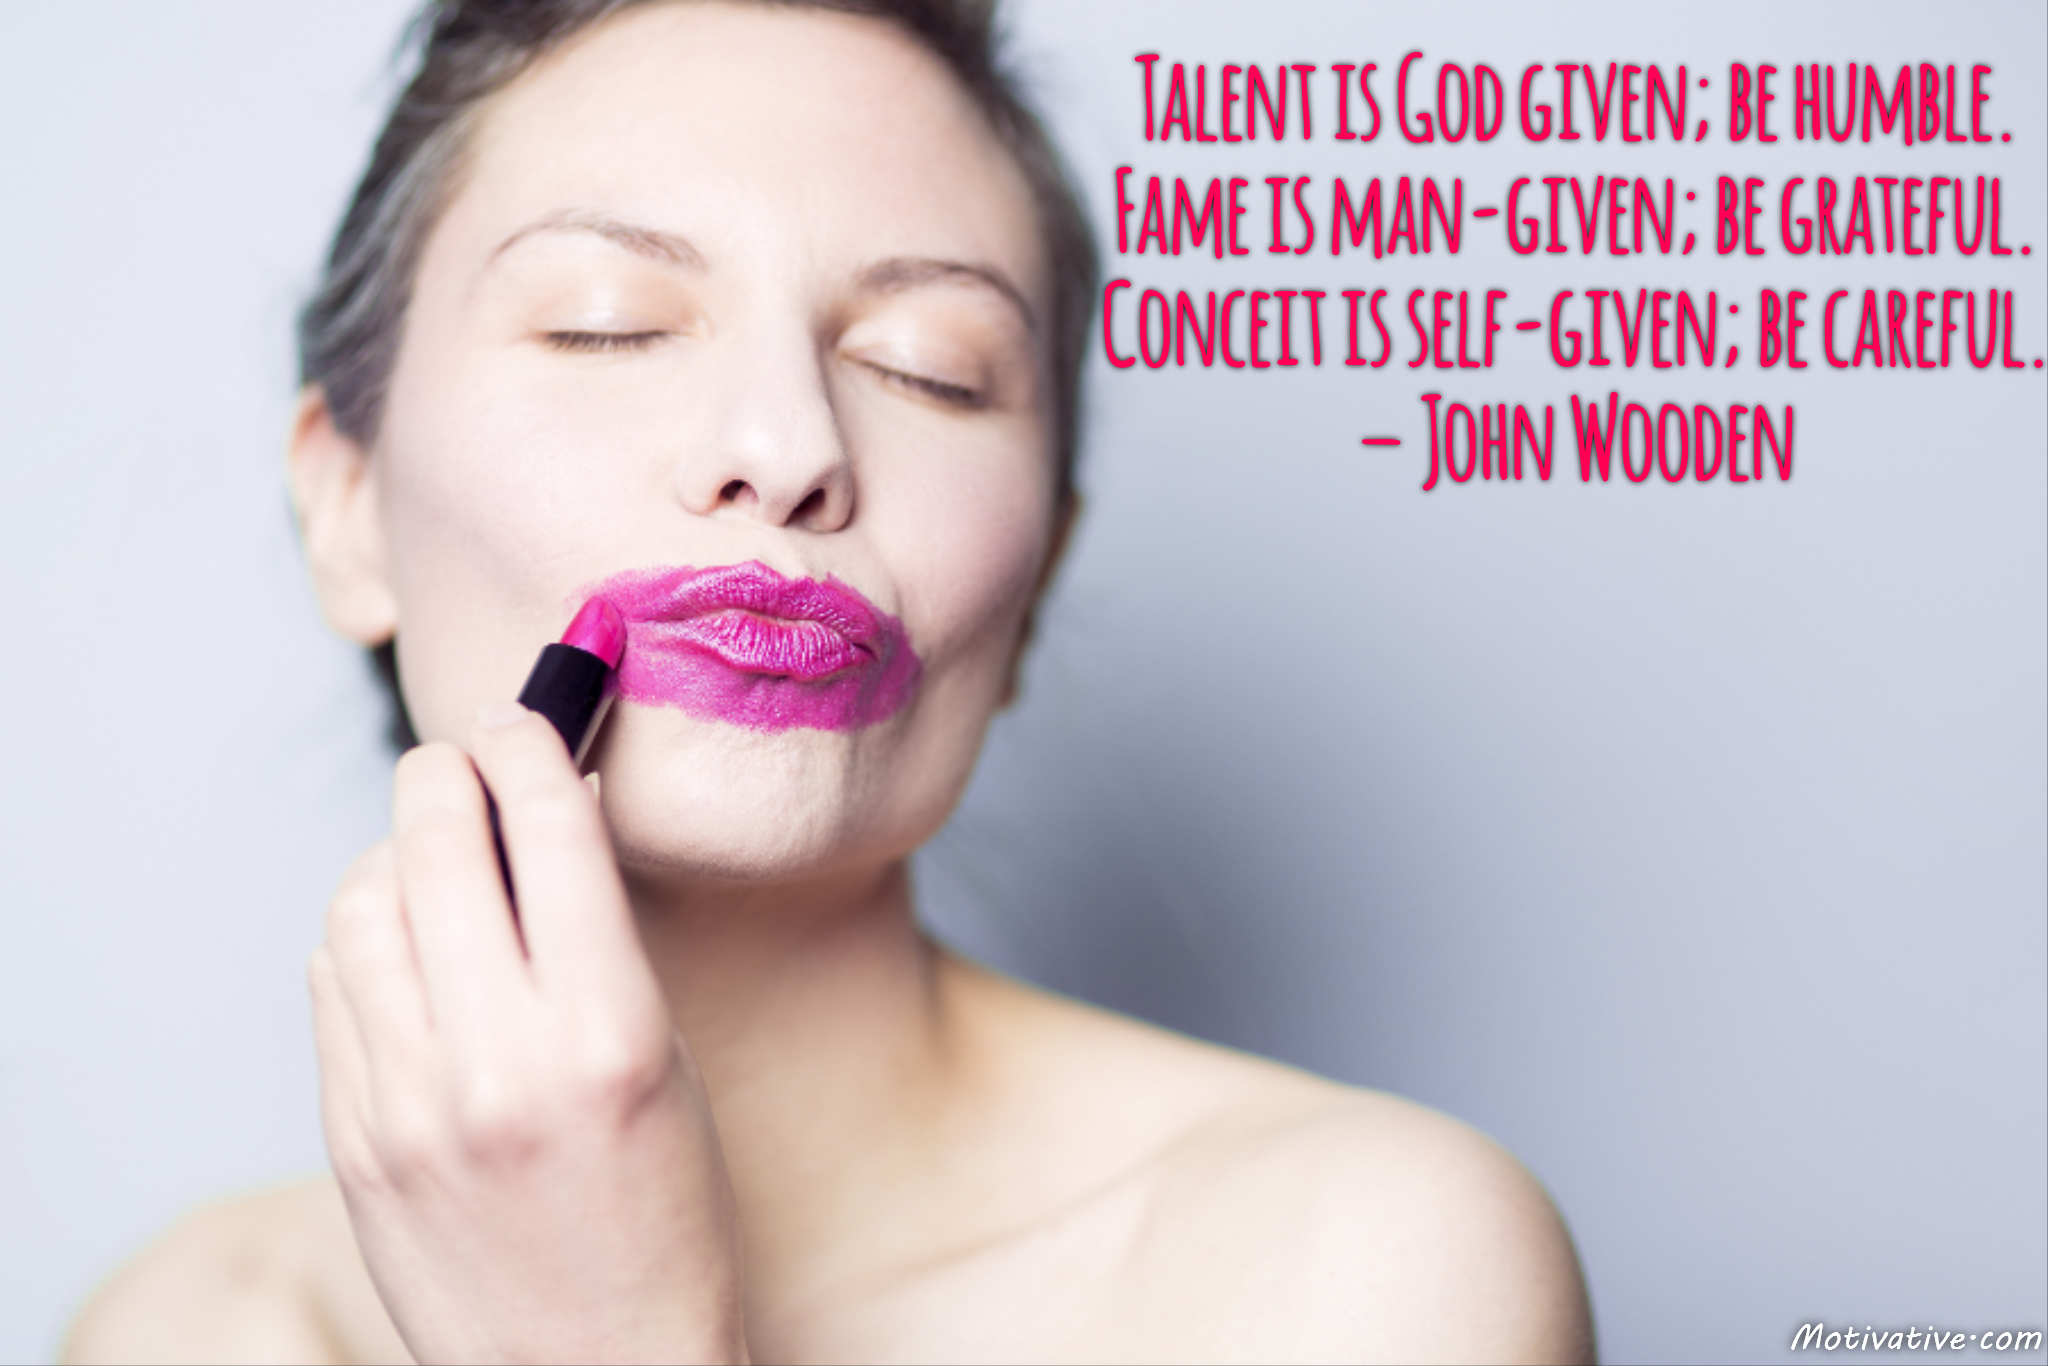 Talent is God given; be humble. Fame is man-given; be grateful. Conceit is self-given; be careful. – John Wooden